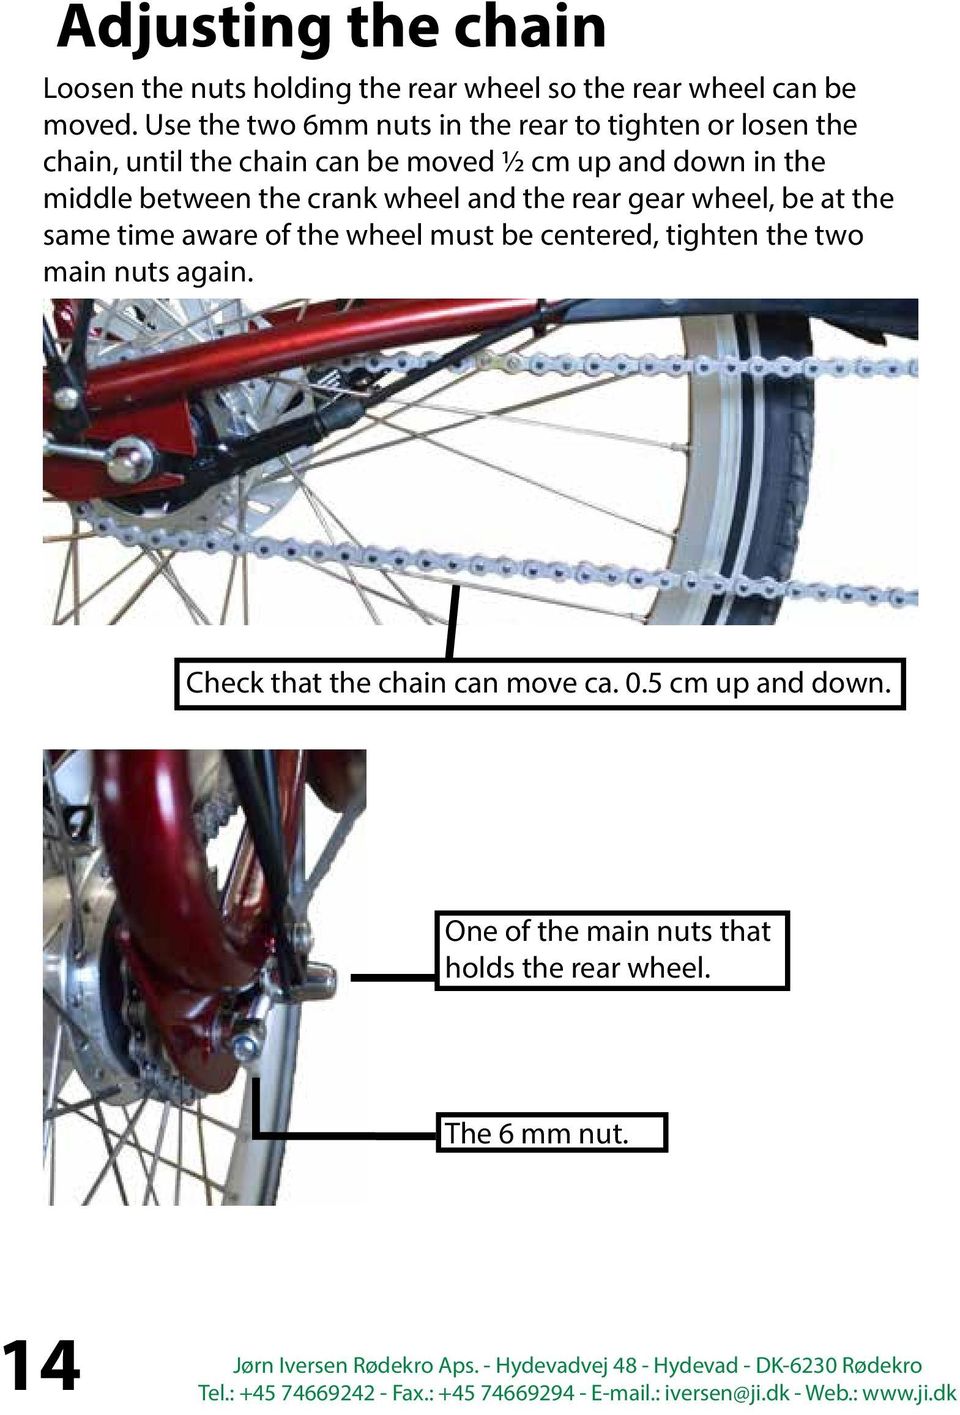 middle between the crank wheel and the rear gear wheel, be at the same time aware of the wheel must be centered,